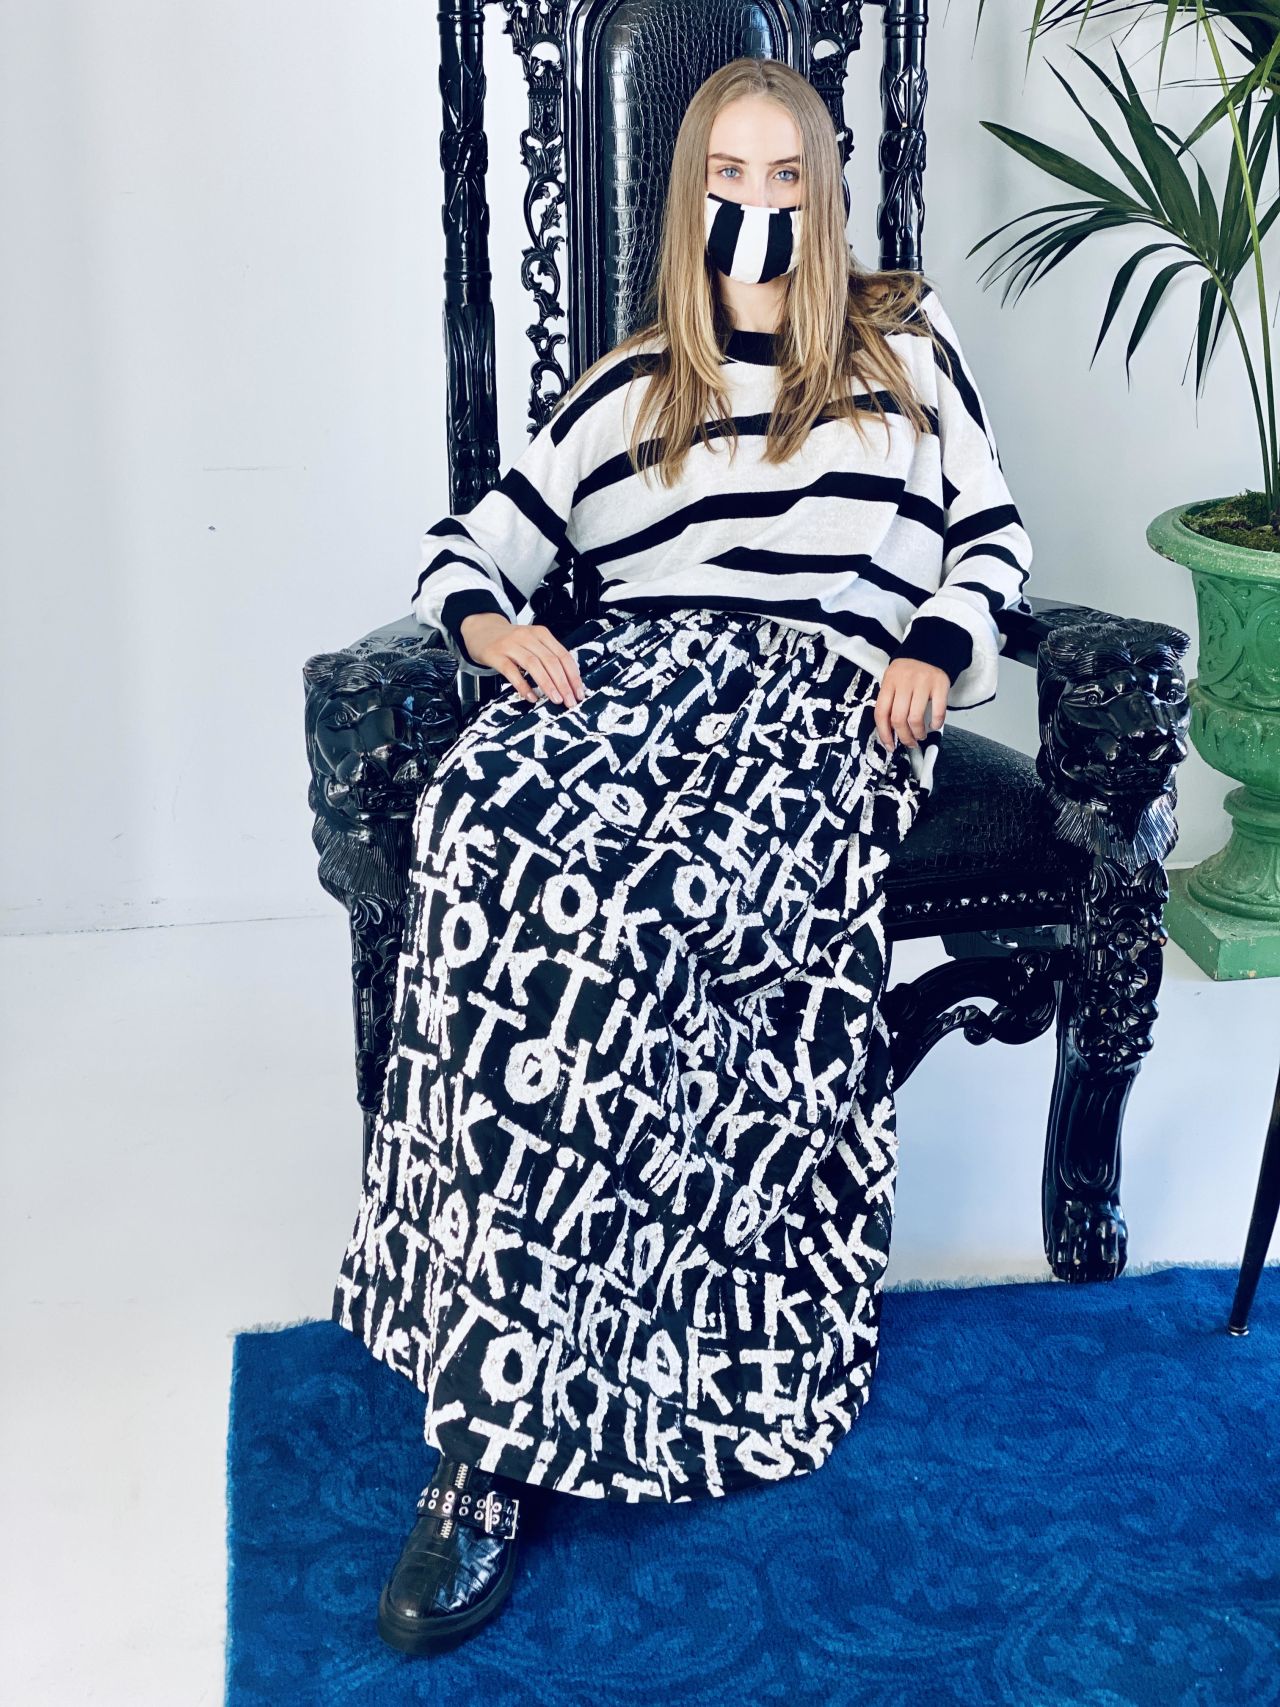 Alice + Olivia co-designed their exclusive capsule collection with TikTok.